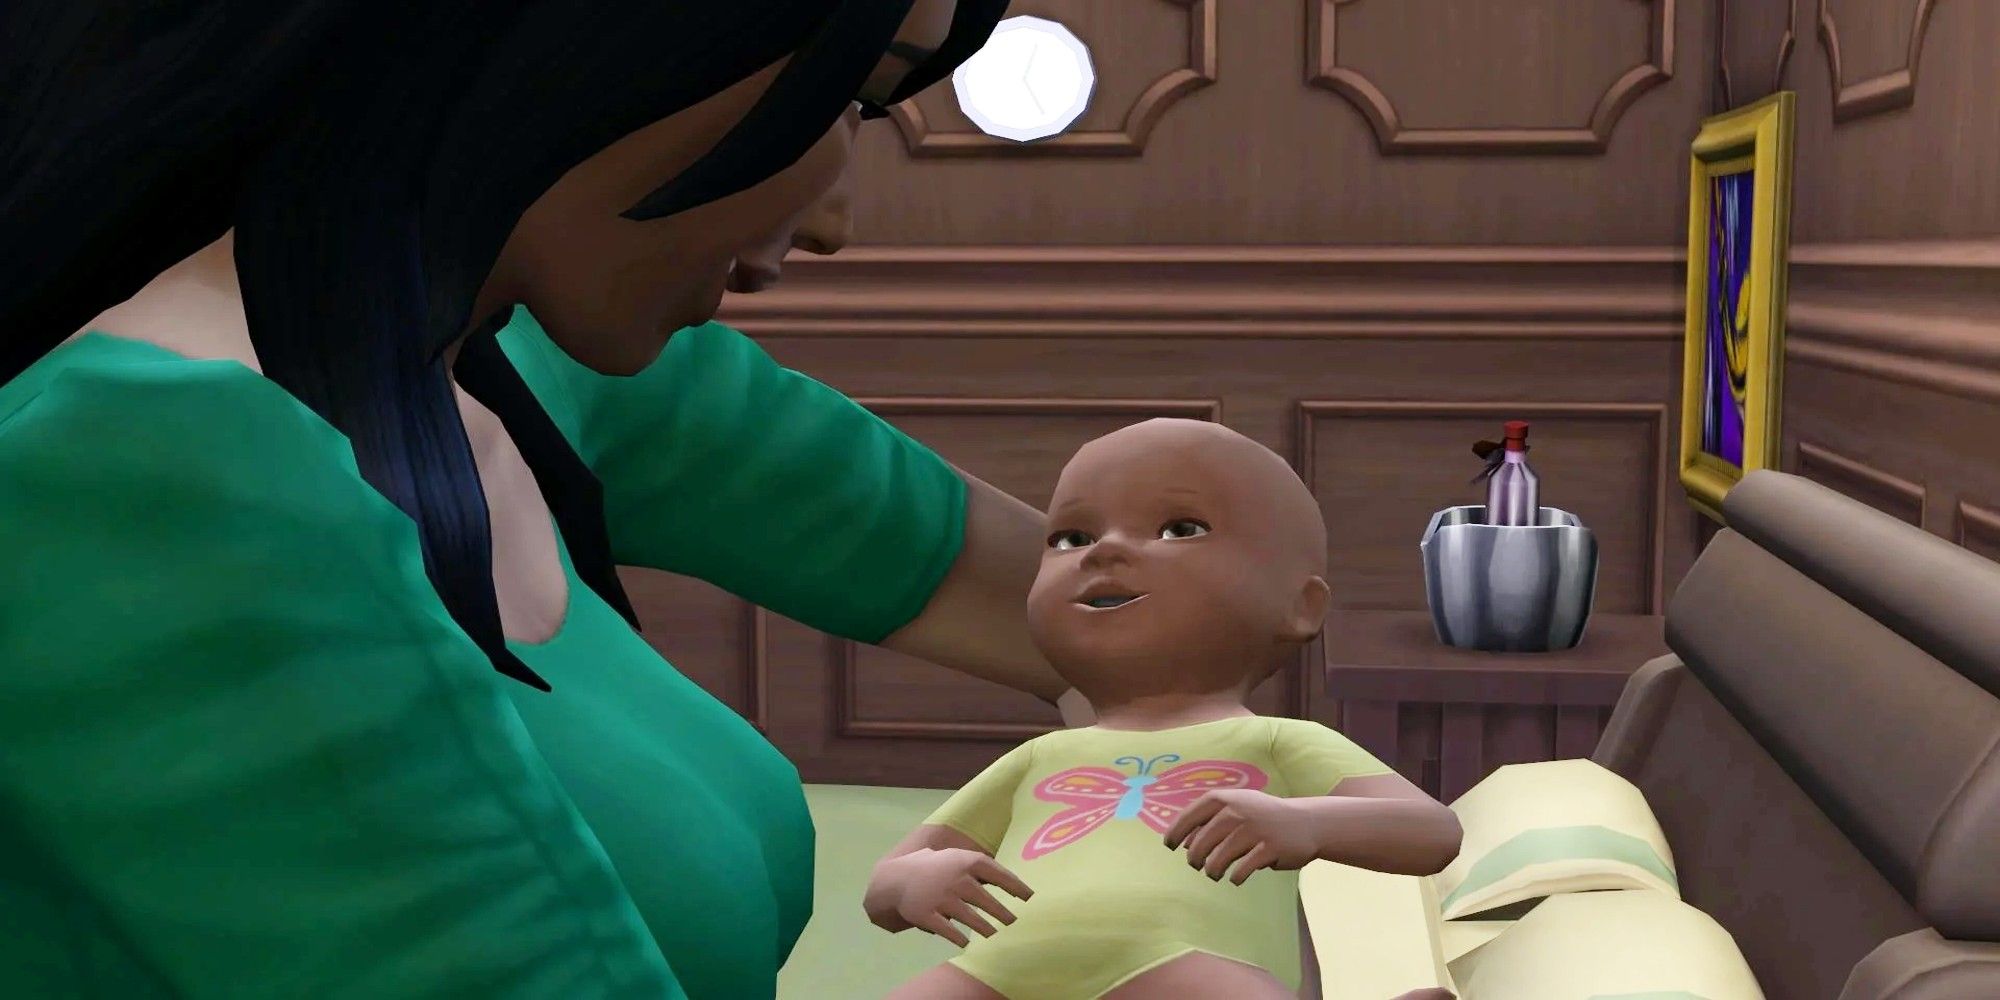 Sims 4 mother holding their baby.